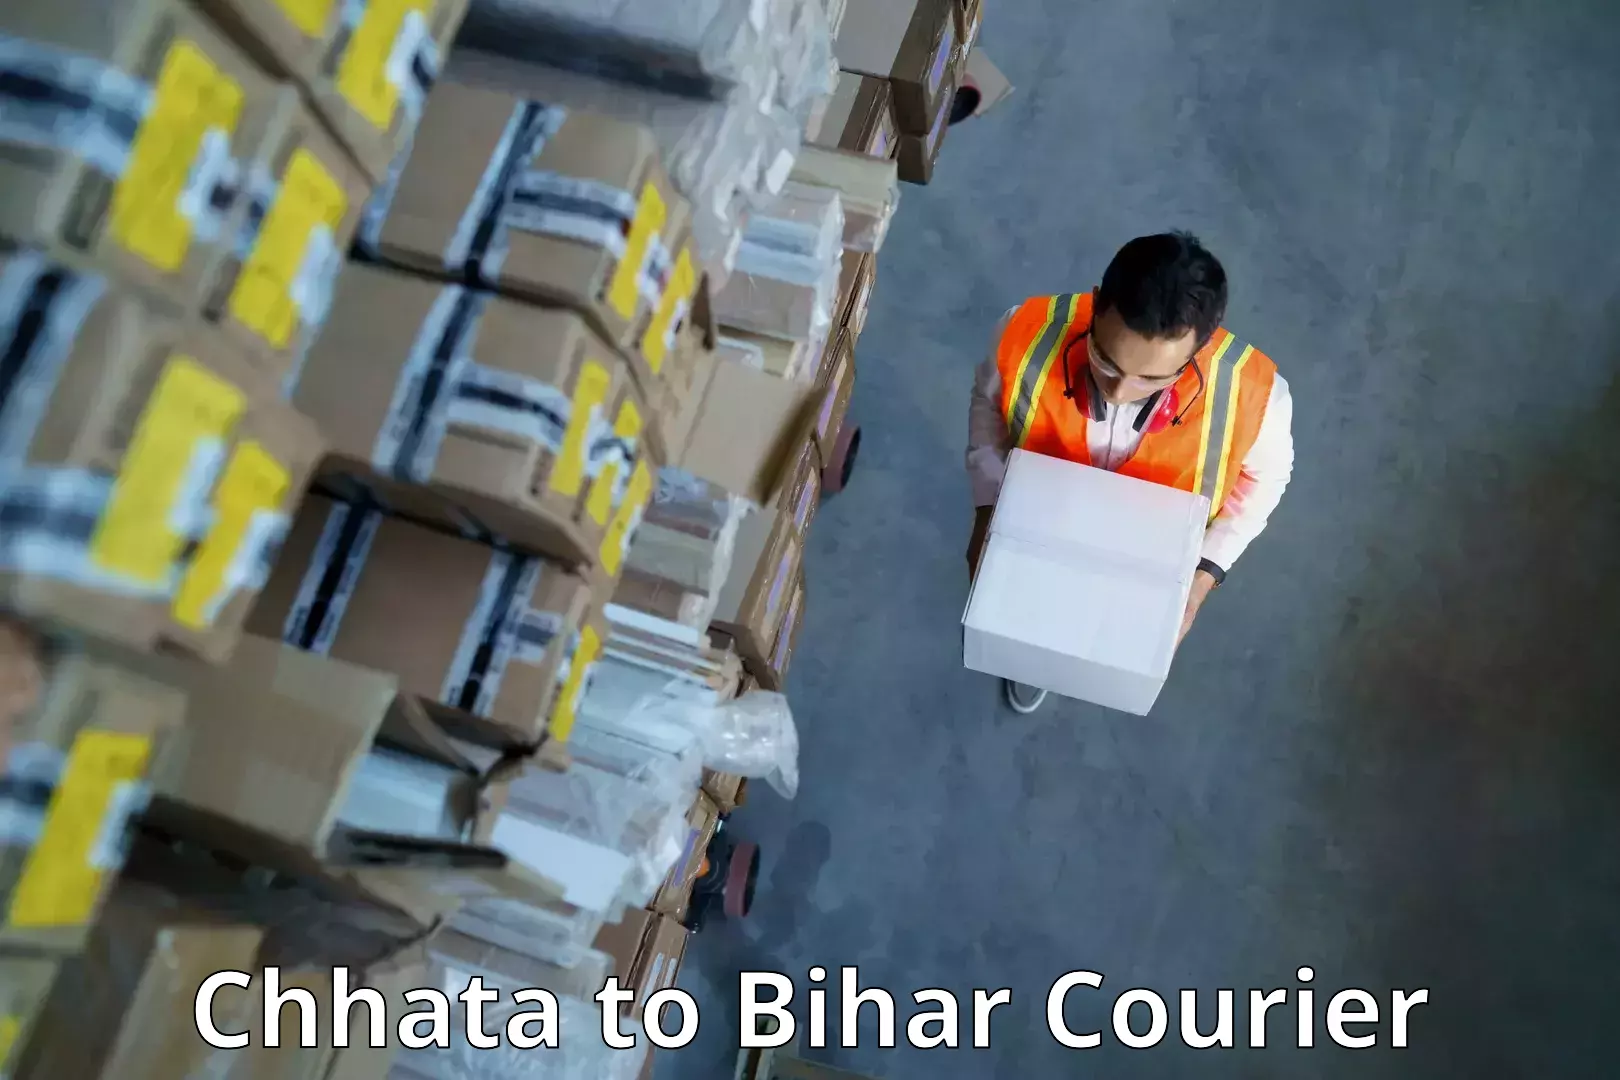 State-of-the-art courier technology Chhata to Bihar